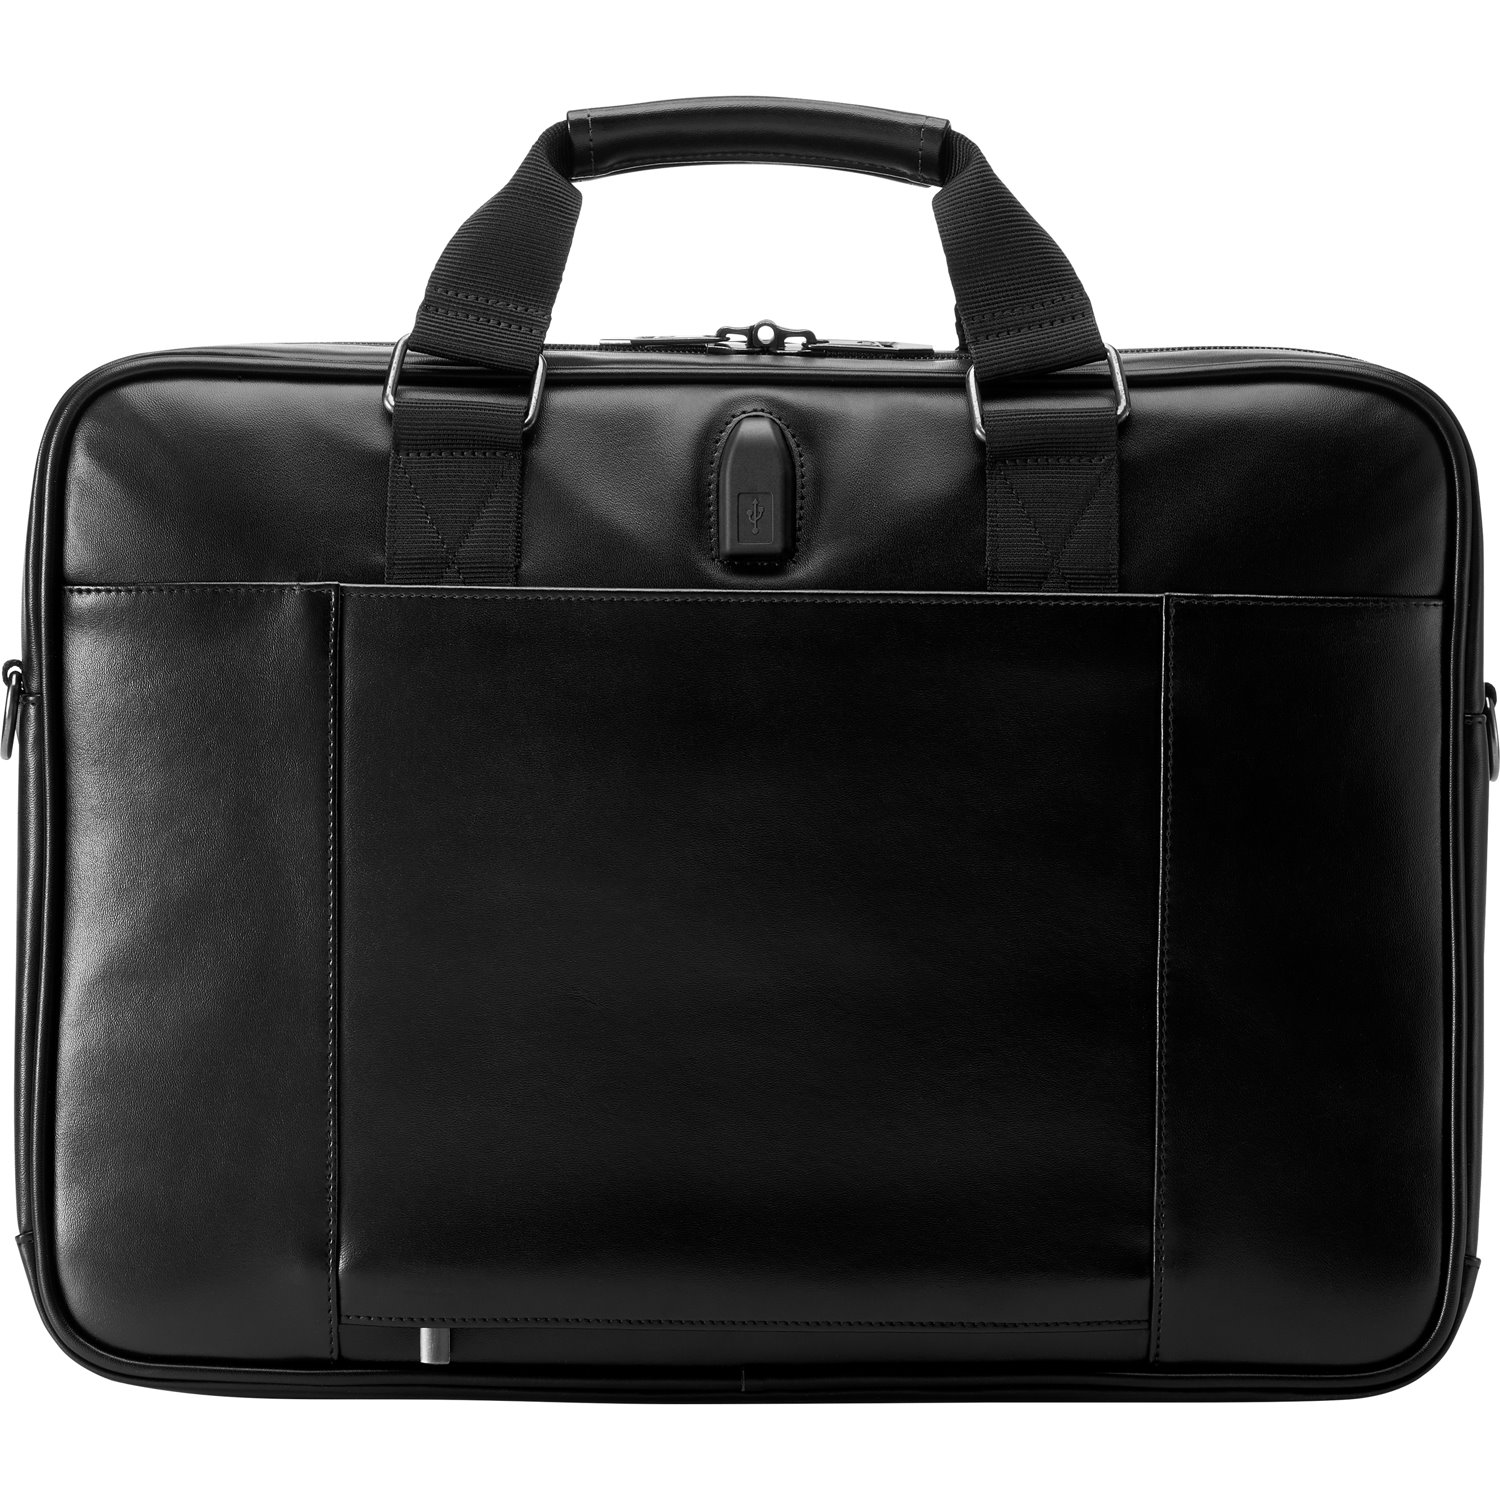 HP Executive Carrying Case for 39.6 cm (15.6") Notebook